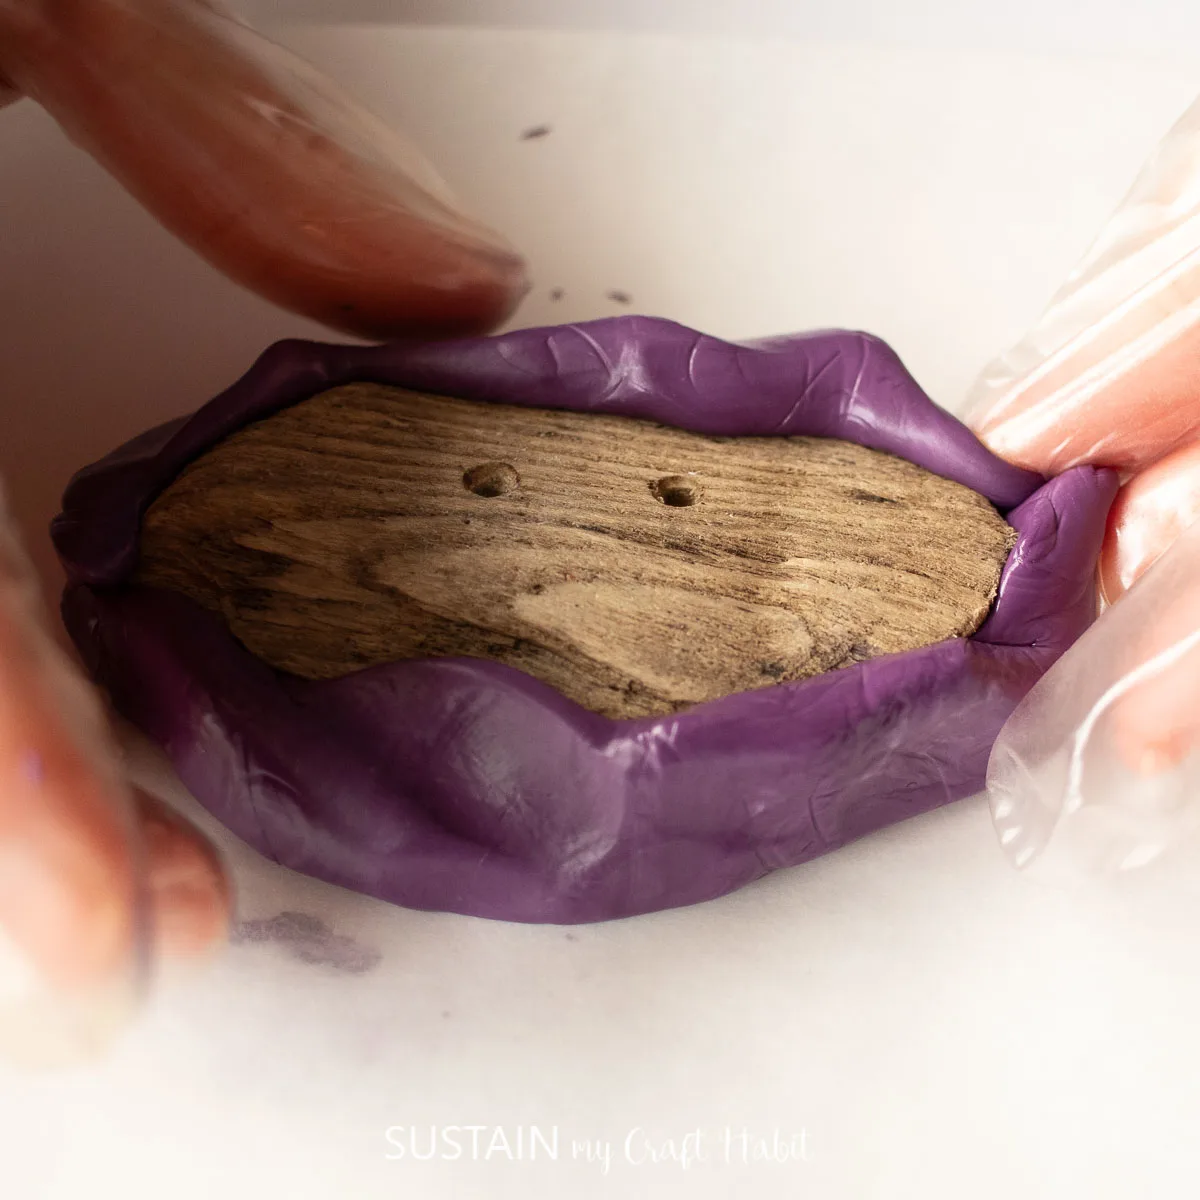 Wrapping silicone putty around the edges of a driftwood button.